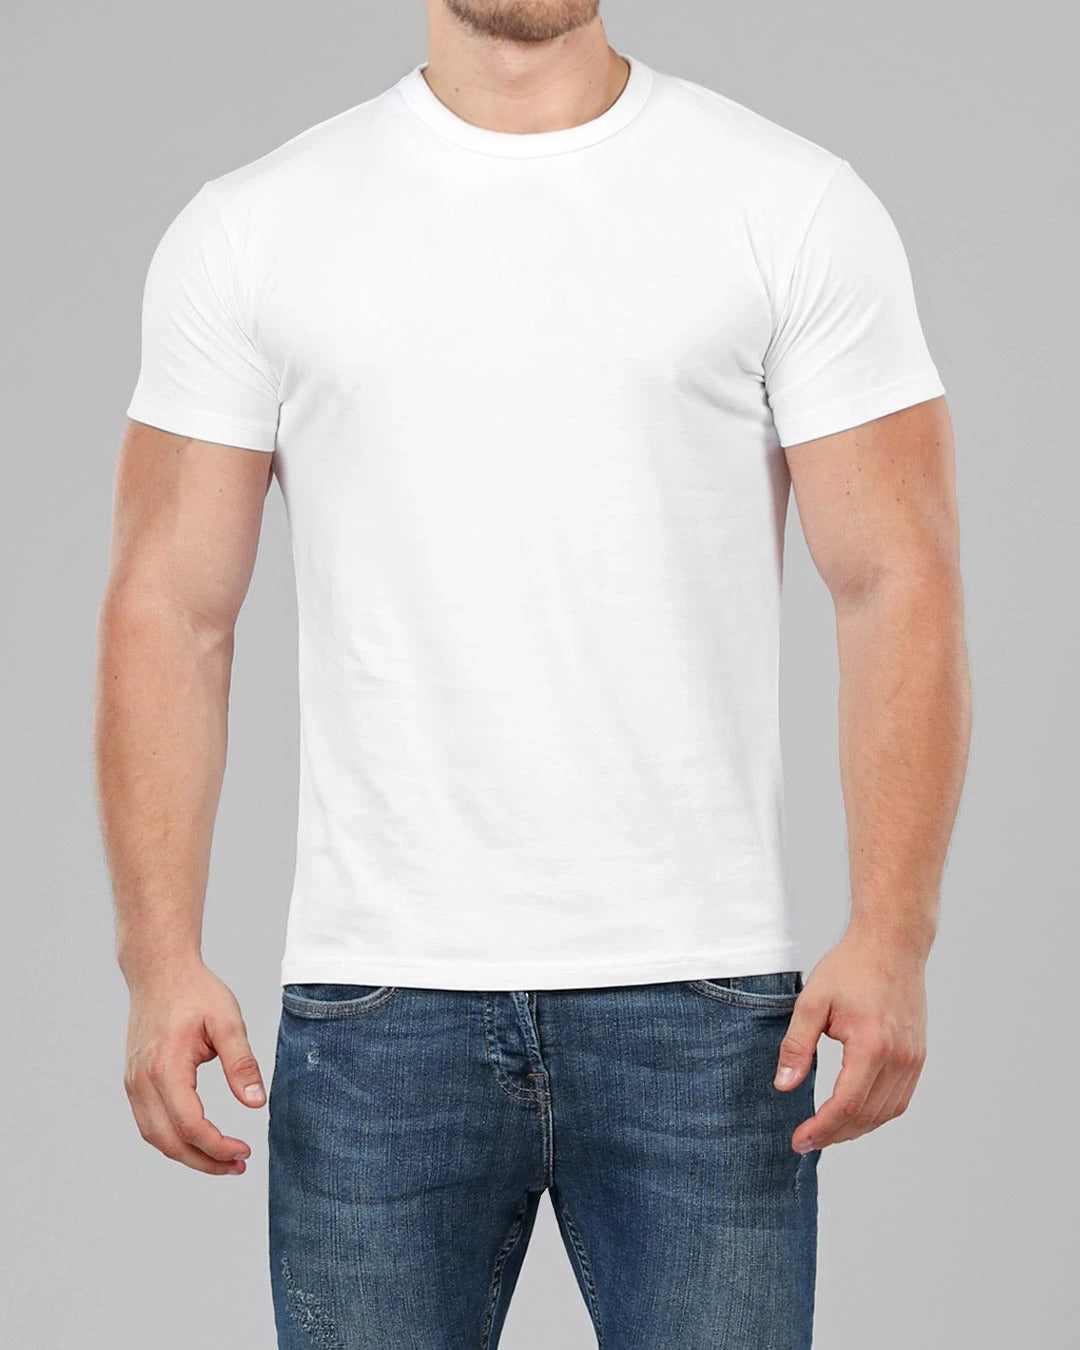 uld studieafgift strubehoved Men's White Crew Neck Fitted Plain T-Shirt | Muscle Fit Basics